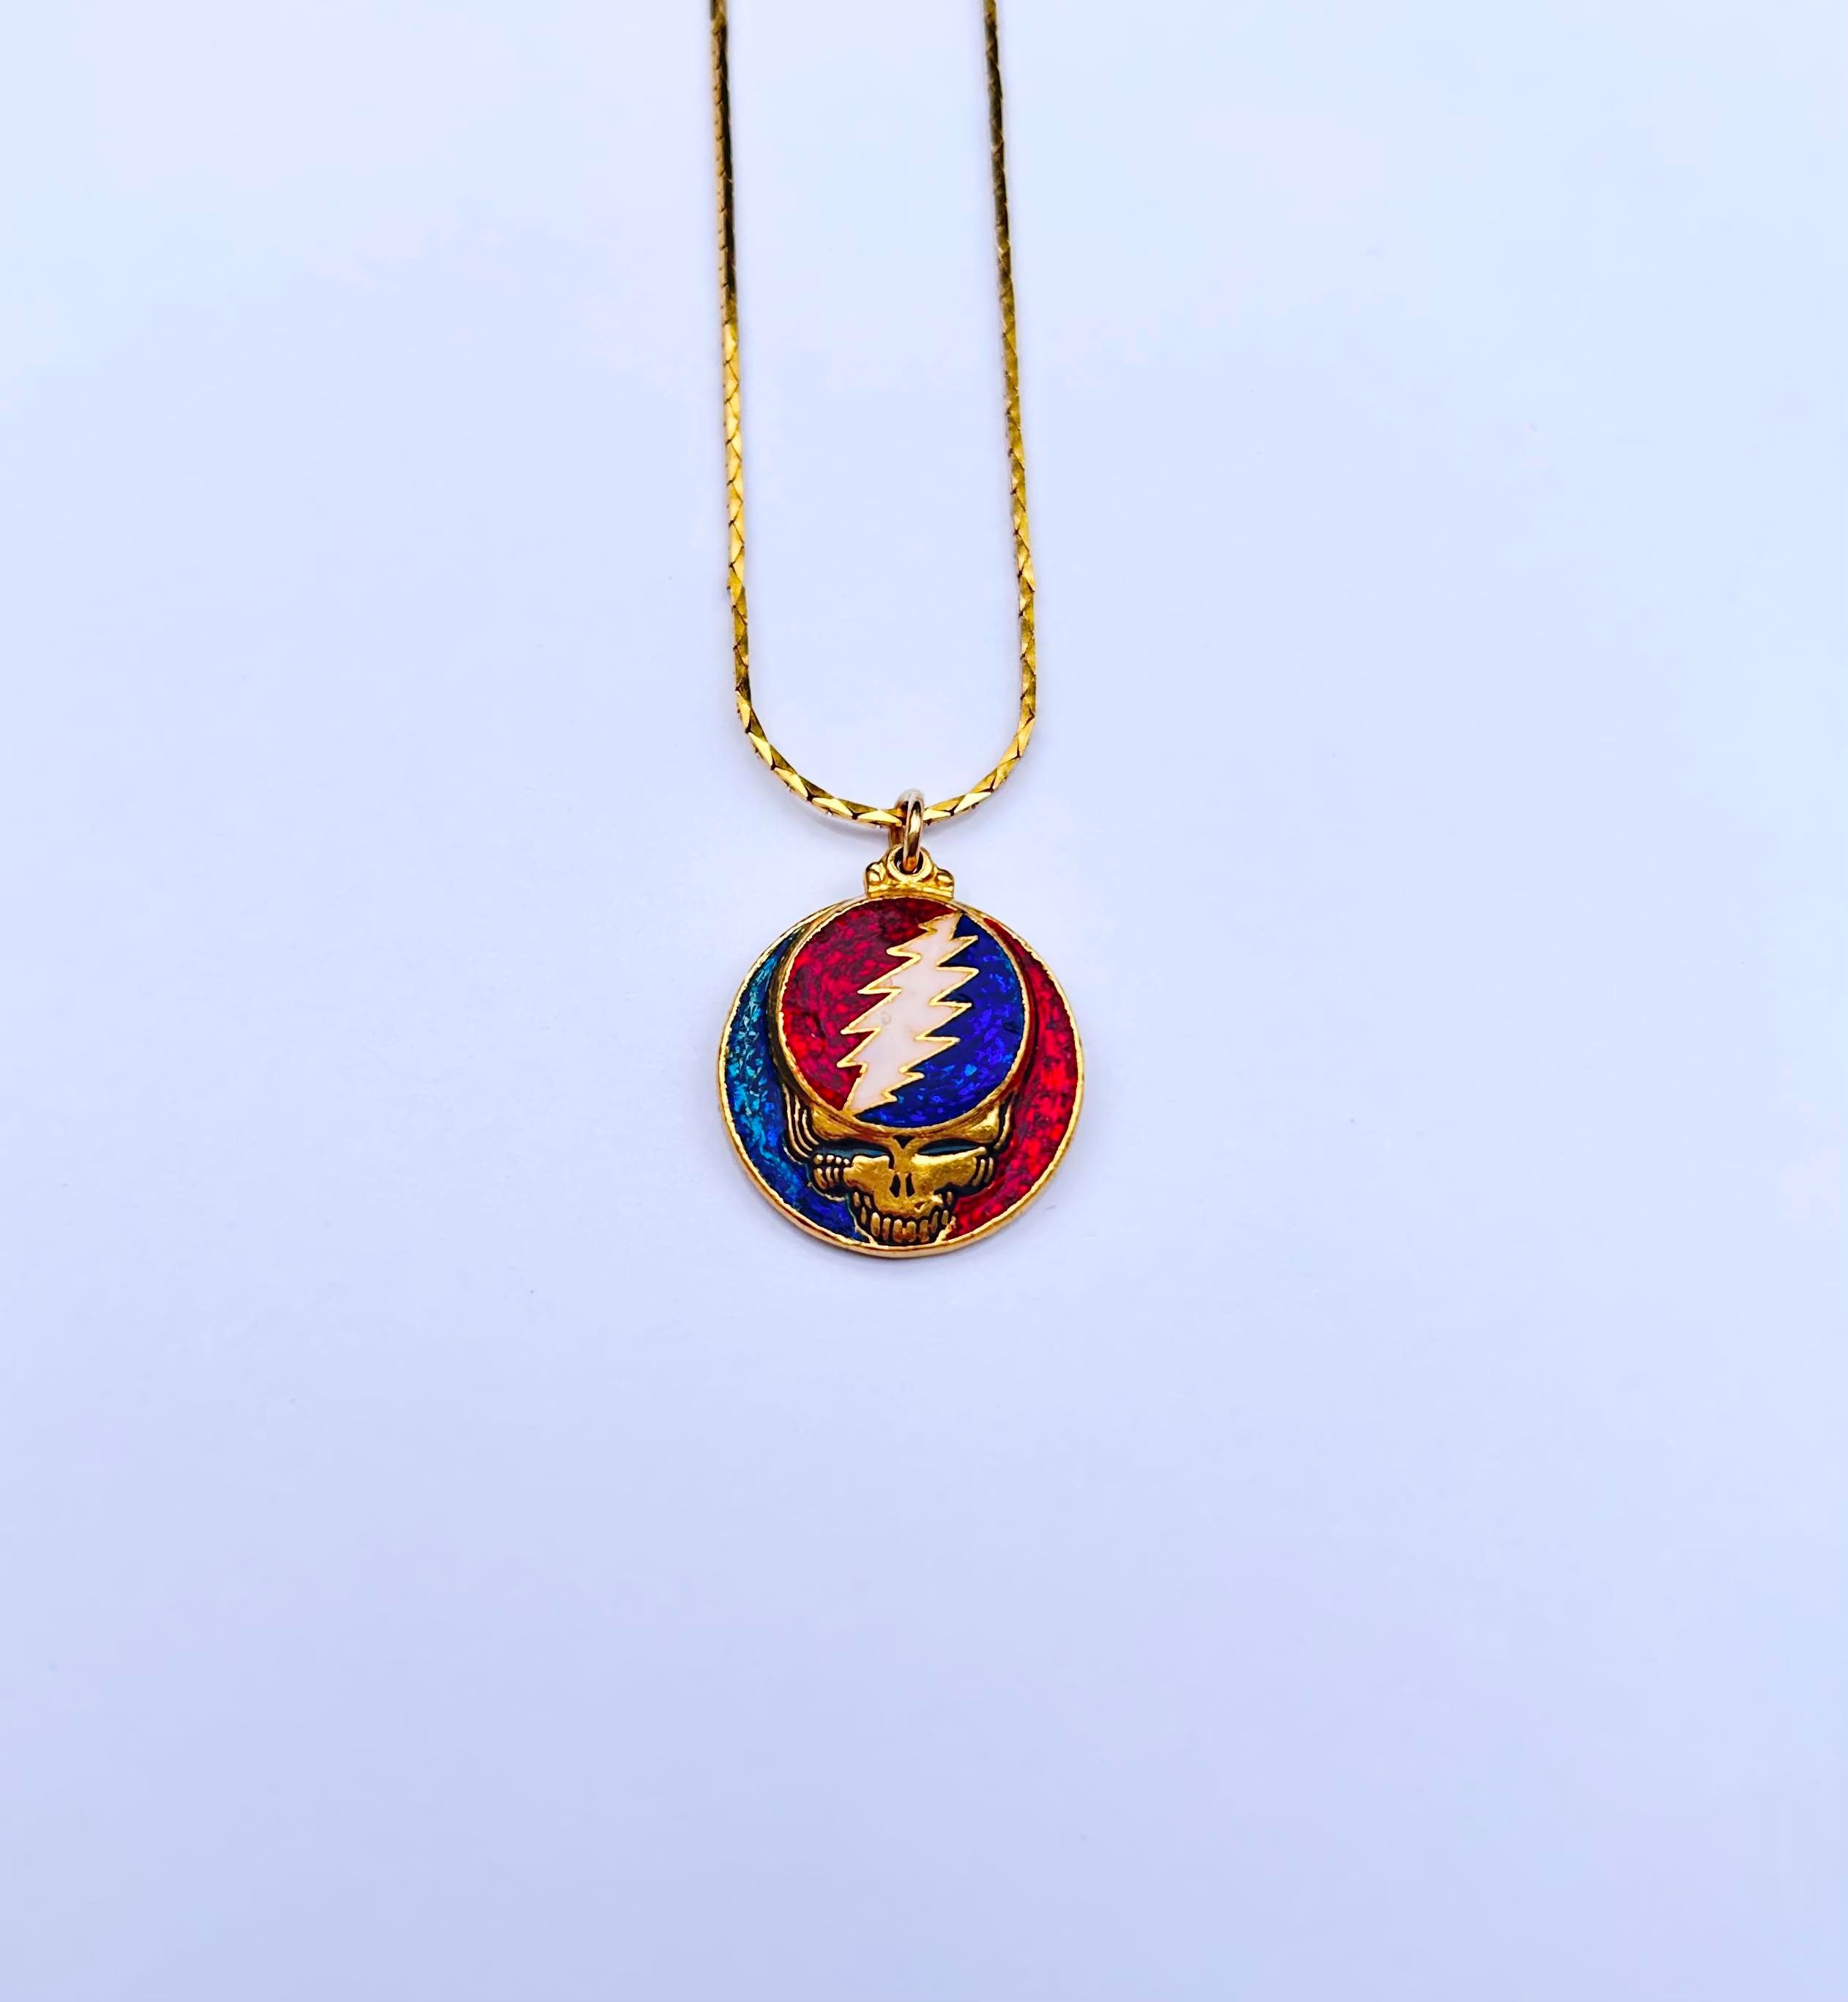 Grateful Dead Online Auction Features Owsley Stanley Jewelry, Jerry  Garcia's Harley Davidson, & More